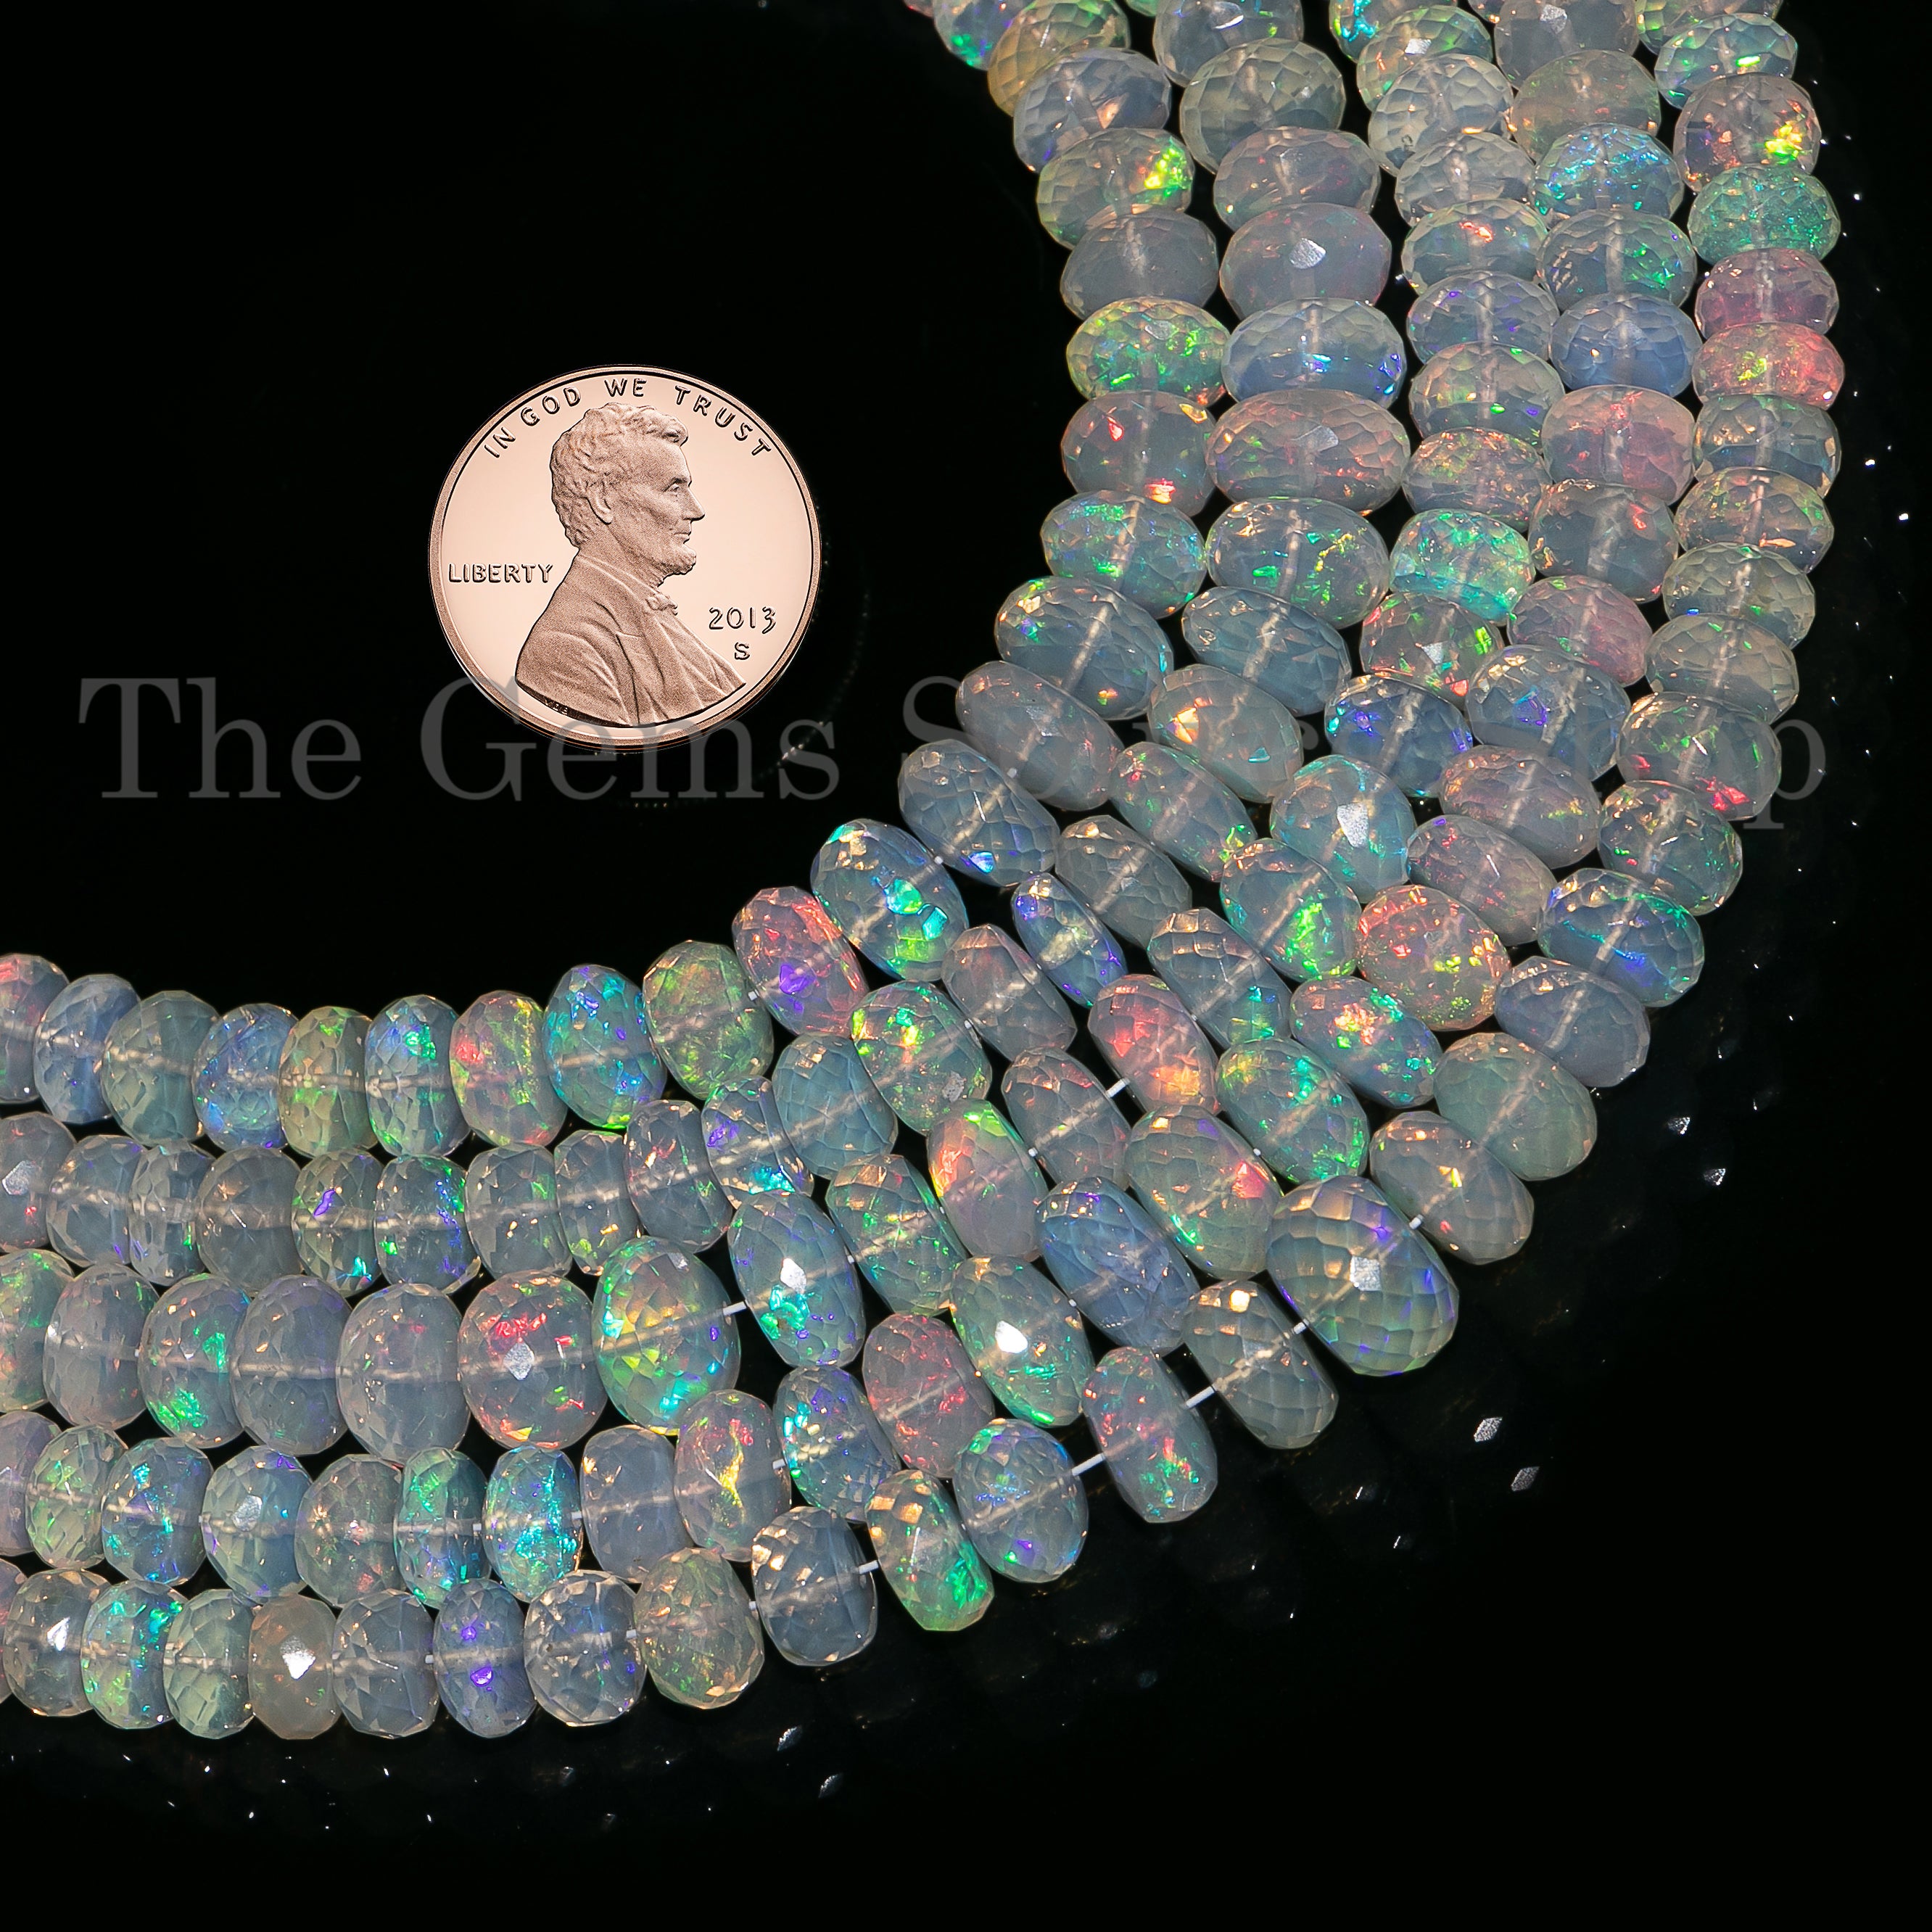 5-8 mm Ethiopian Opal Beads, Opal Faceted Beads, Opal Rondelle Beads, Opal Faceted Rondelle Beads, Opal Gemstone Beads